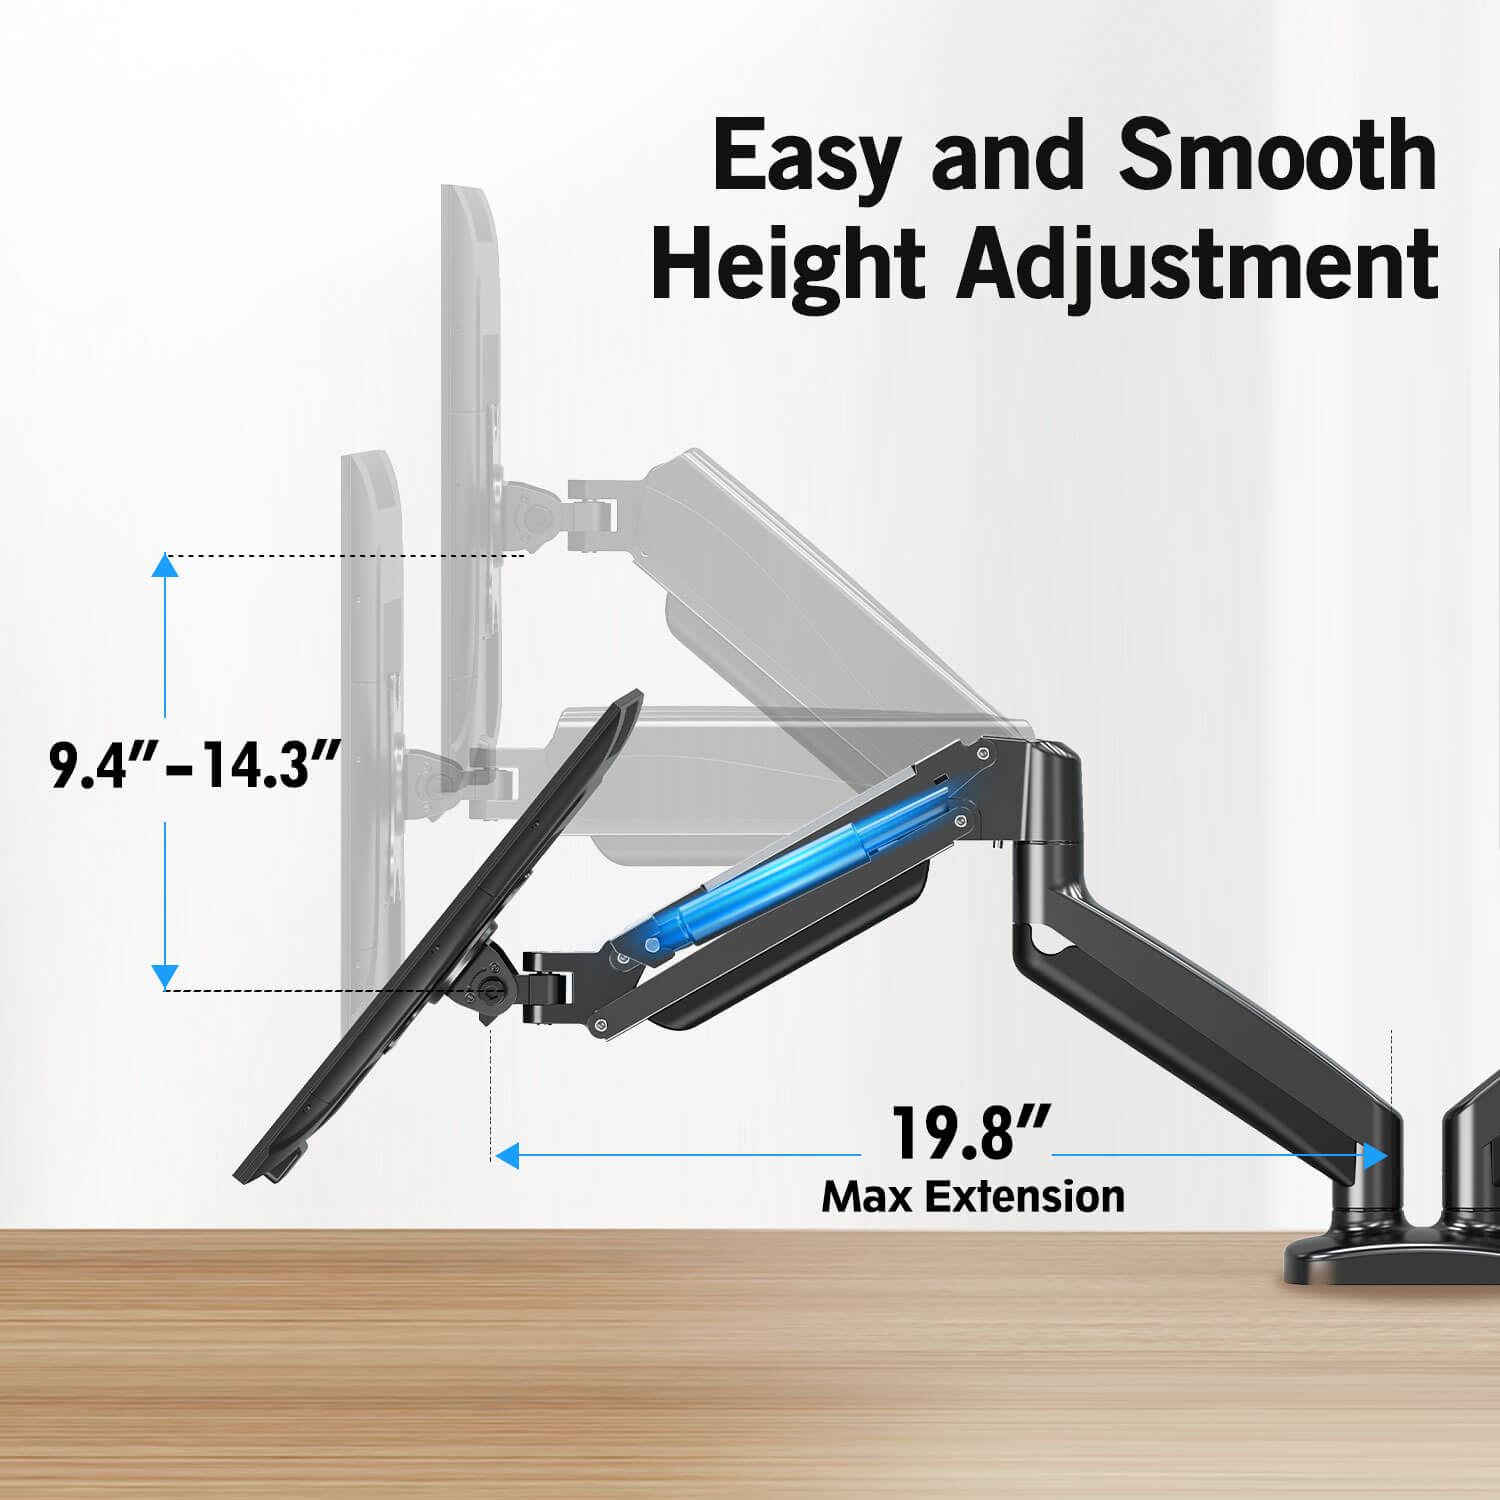 Adjustable Dual Arm: One Mount Floats Two Monitors